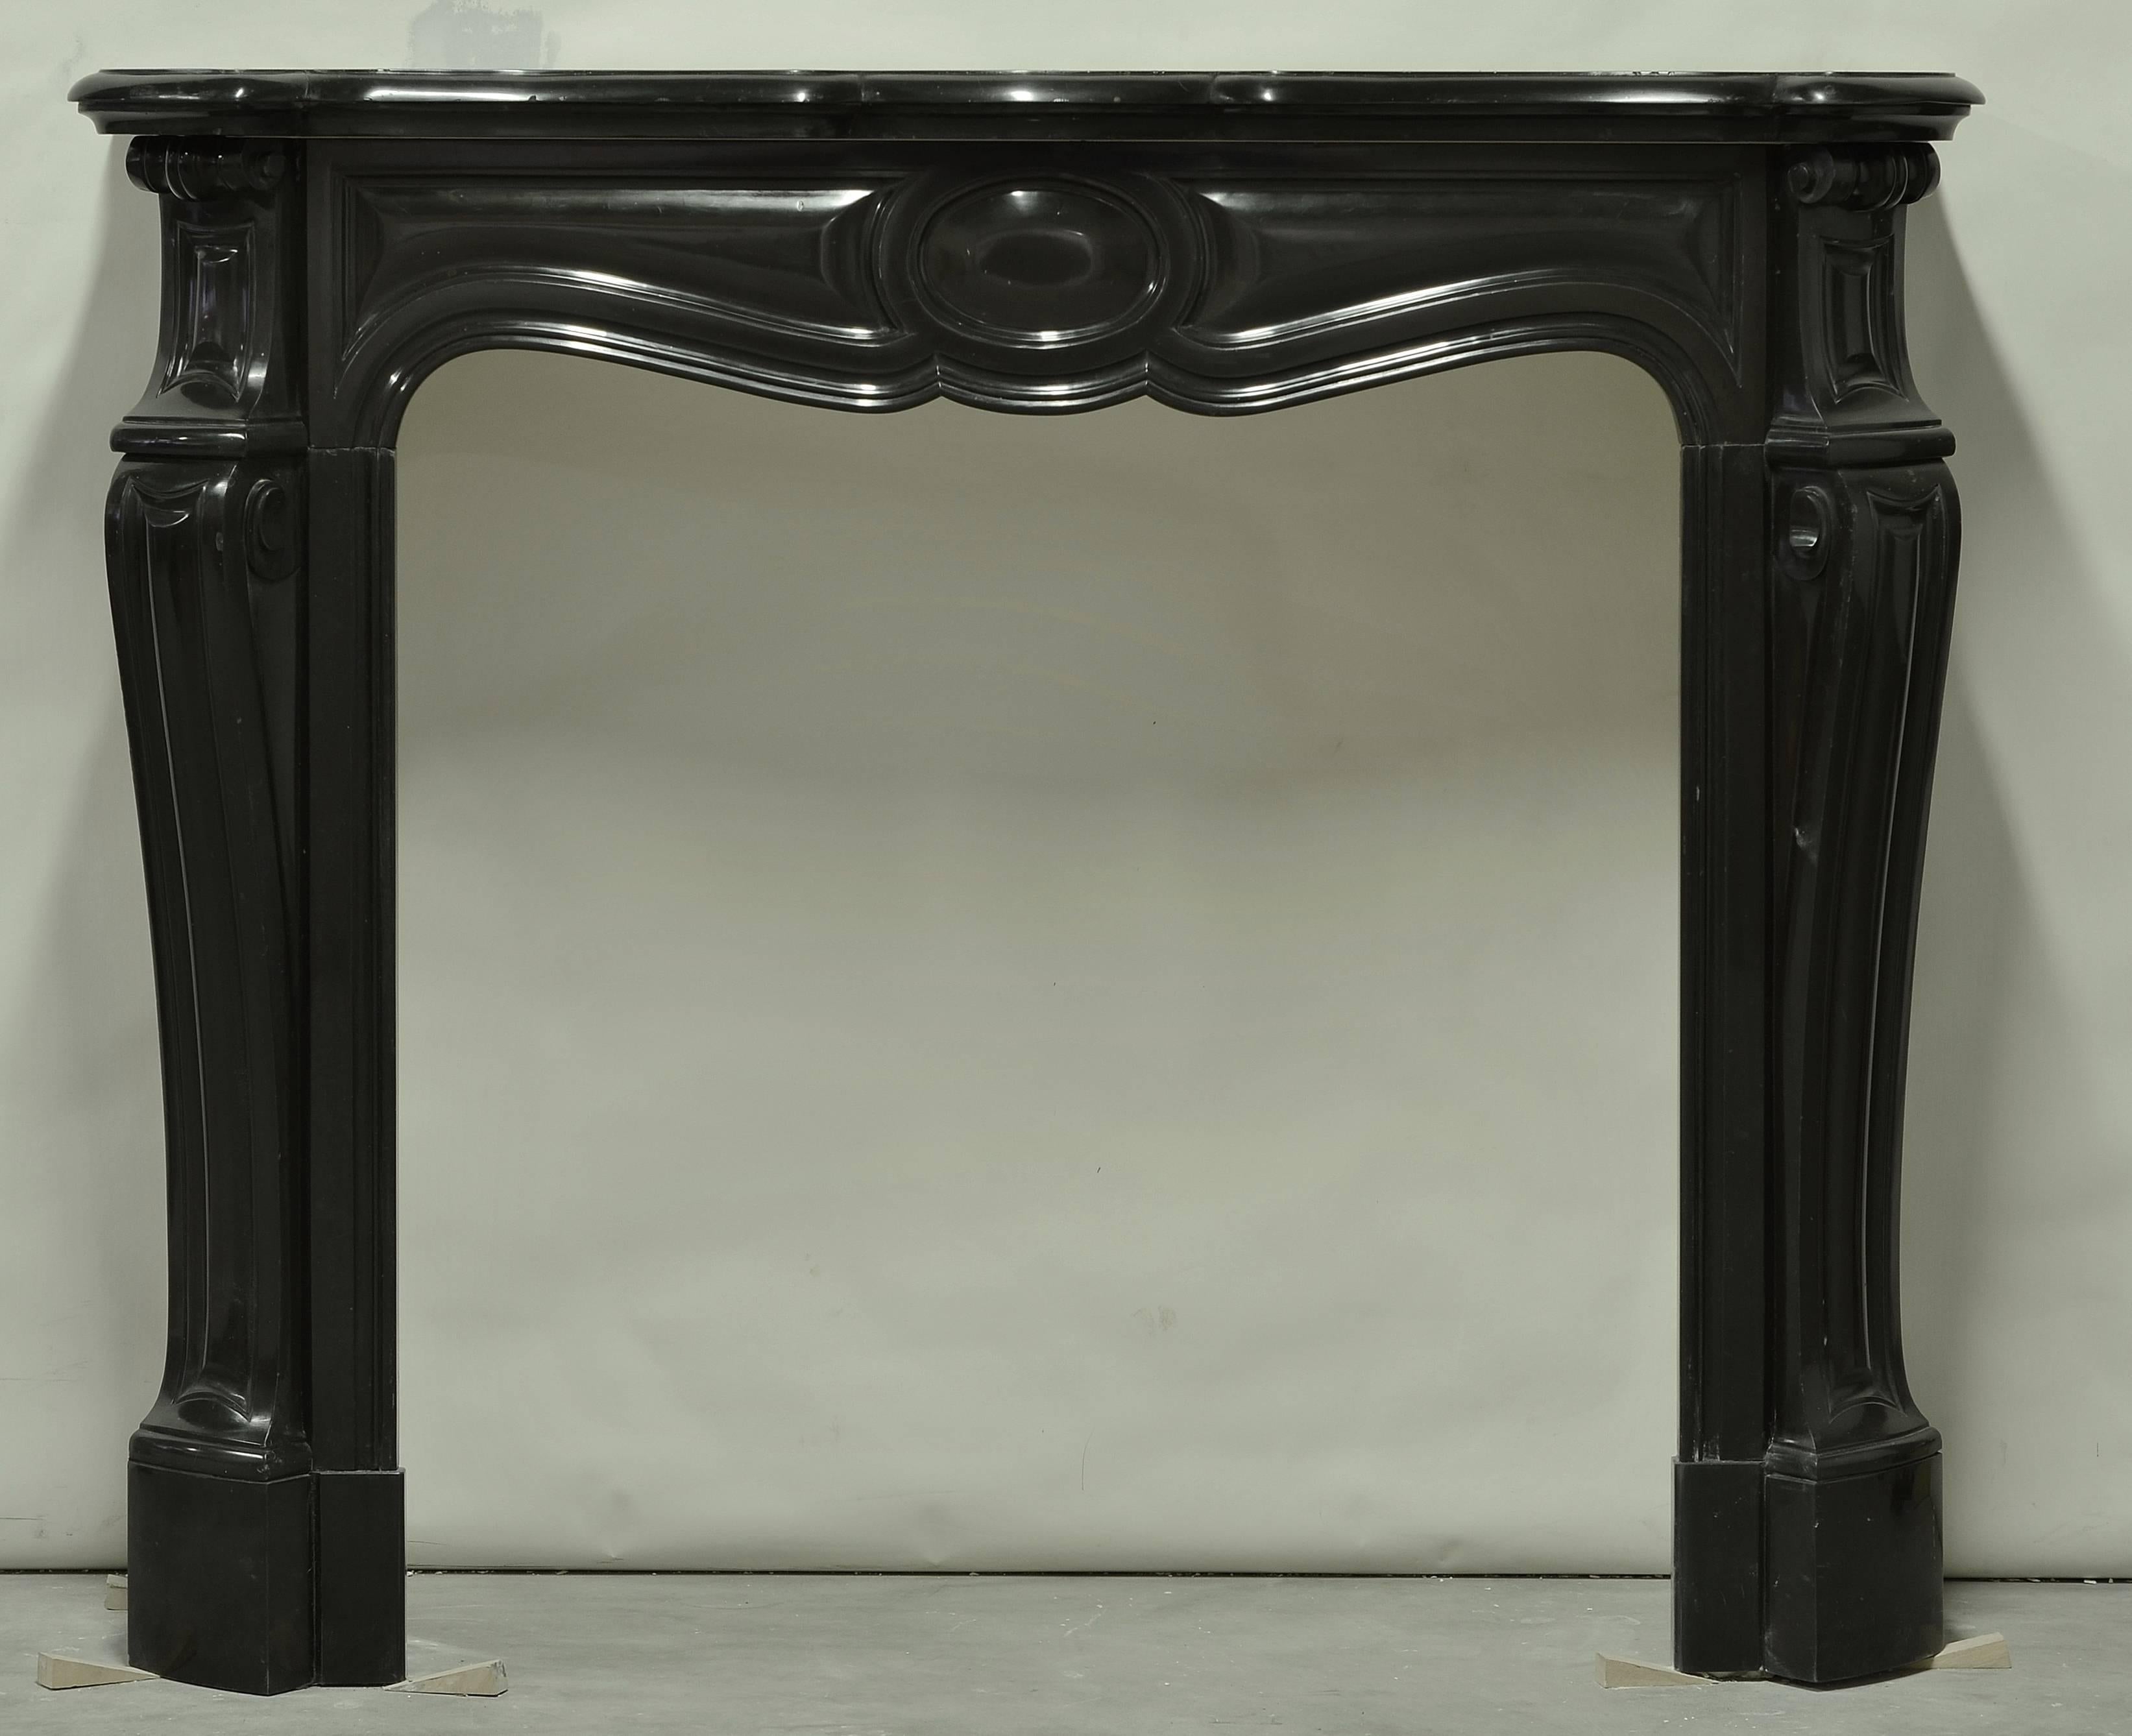 Very nice, original and decorative black marble Pompadour style fireplace. Comes with original porcelain insert,
19th century, France.

Opening measurements fireplace: 33 x 33 inch (height x width). 
Opening measurements insert: 21.4 x 23.8.

Crack